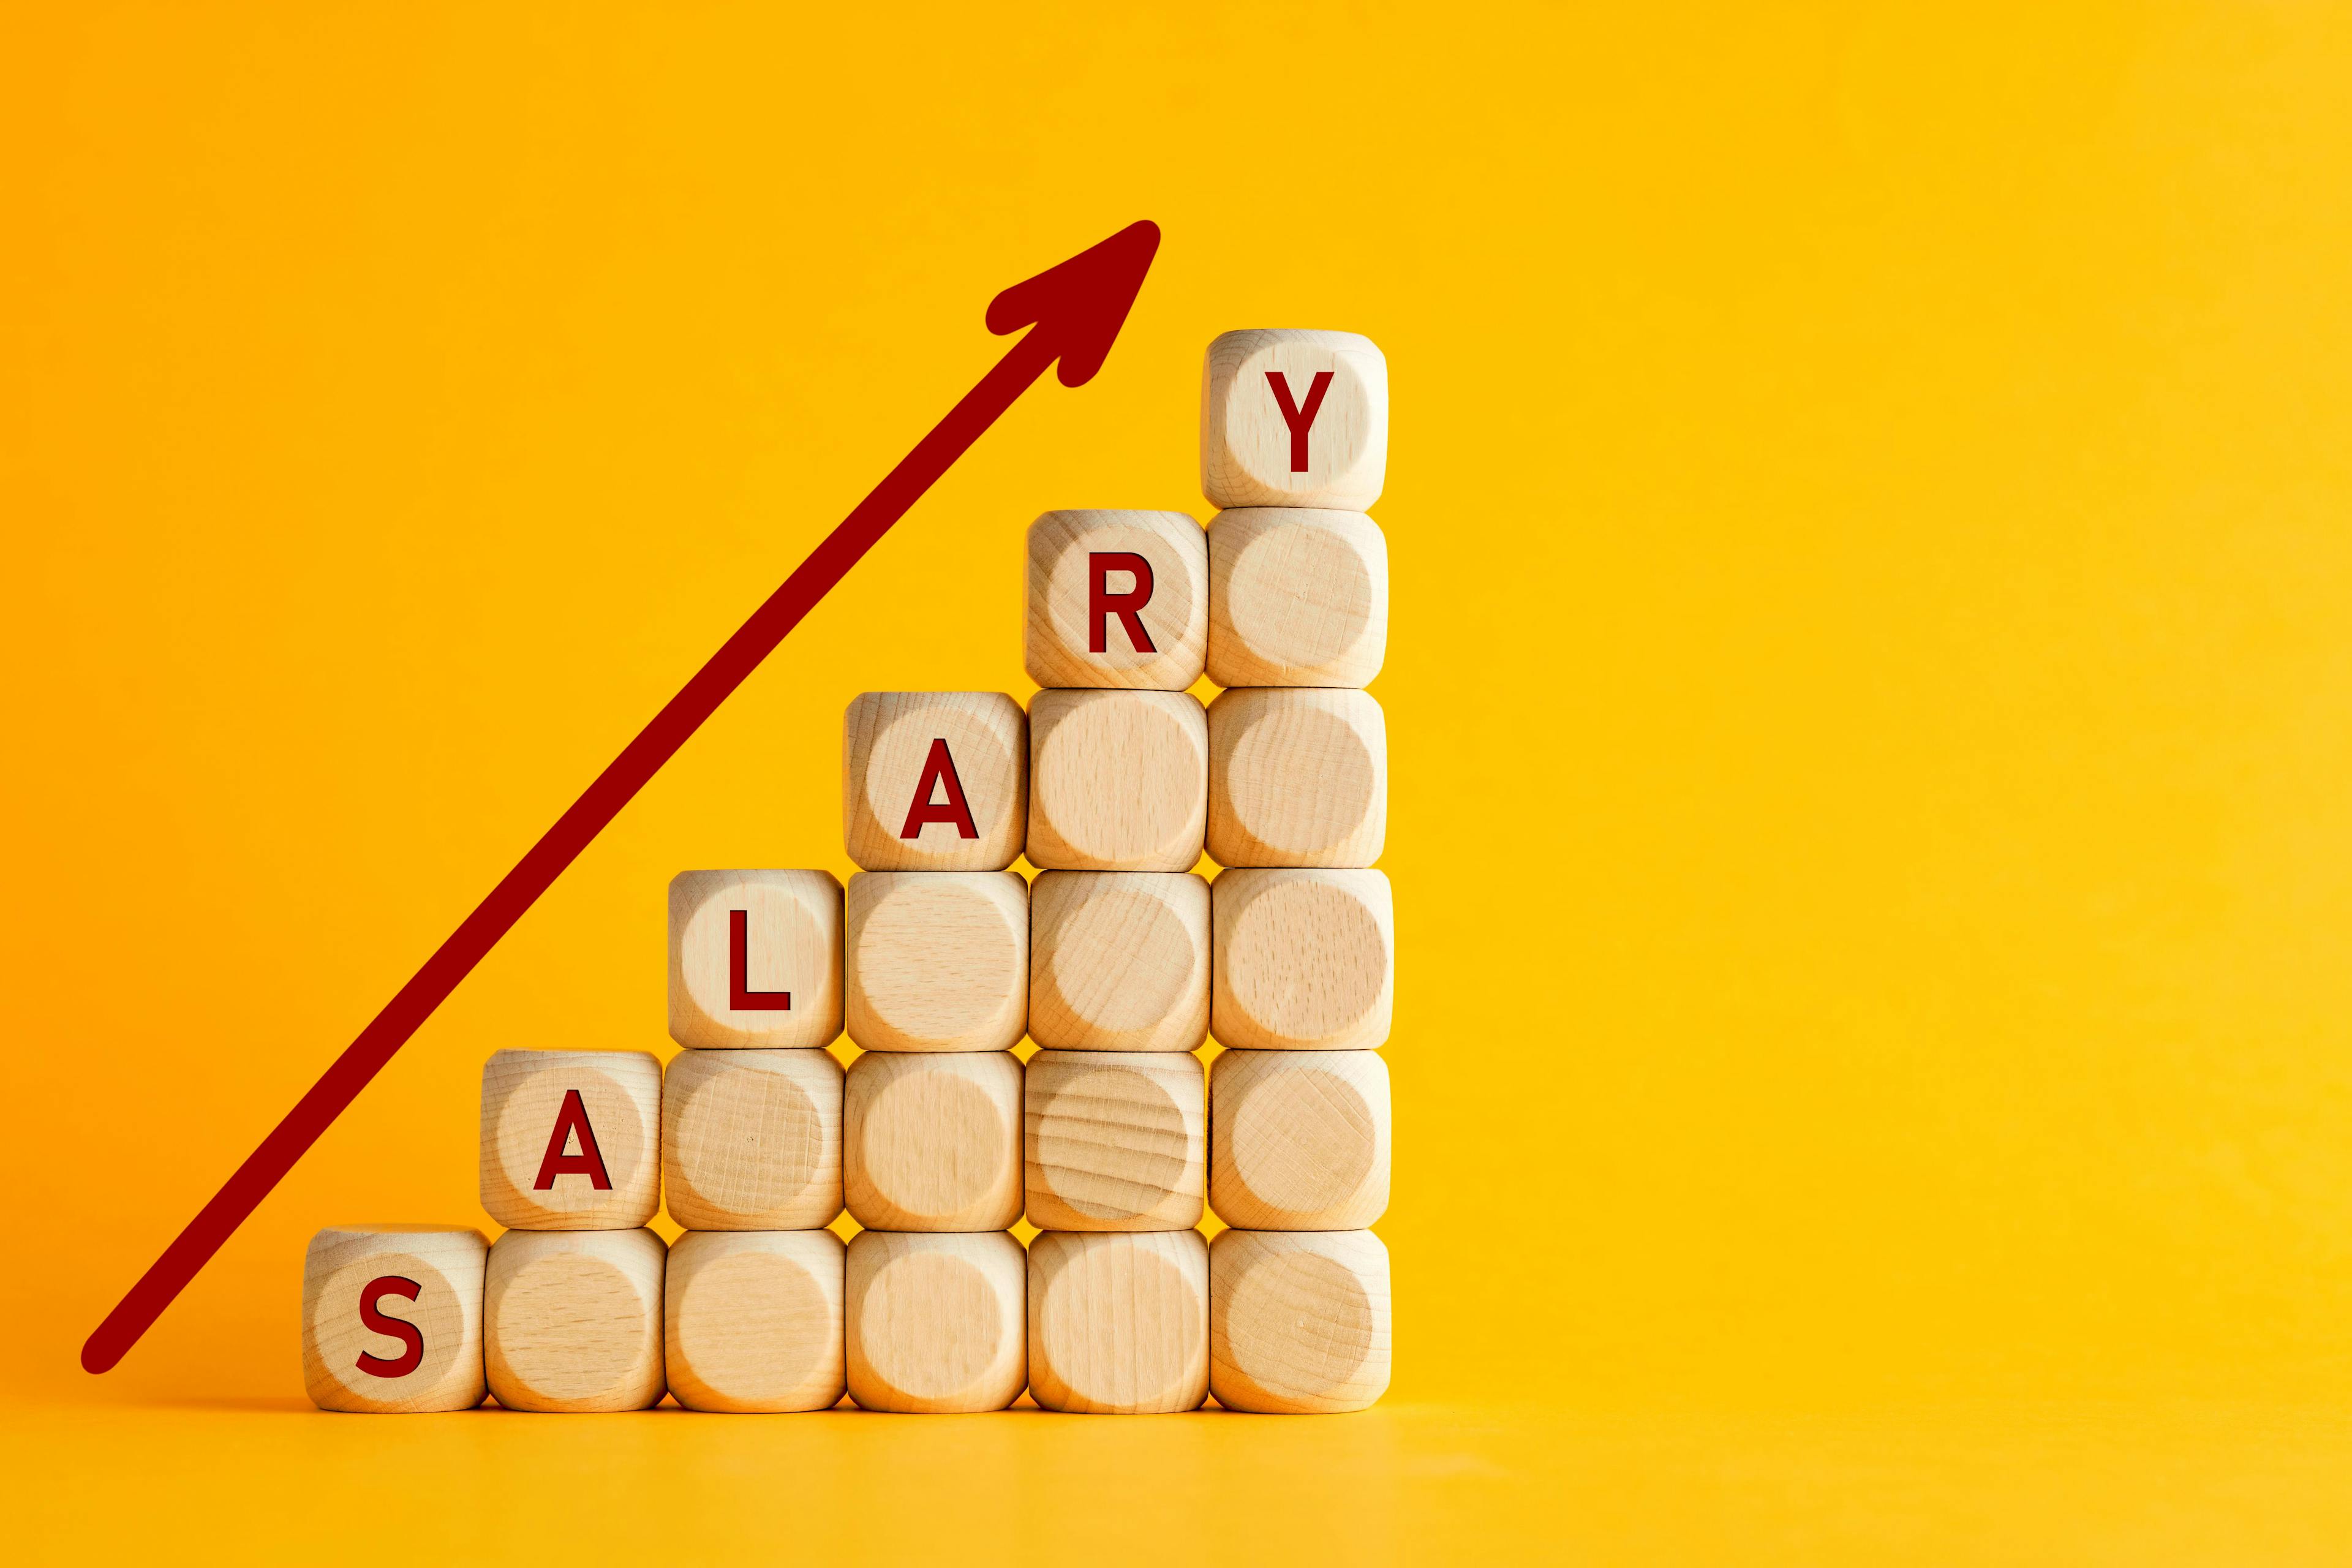 Salary raise or wage increase concept. The word salary on stacked wooden blocks with an ascending arrow icon.